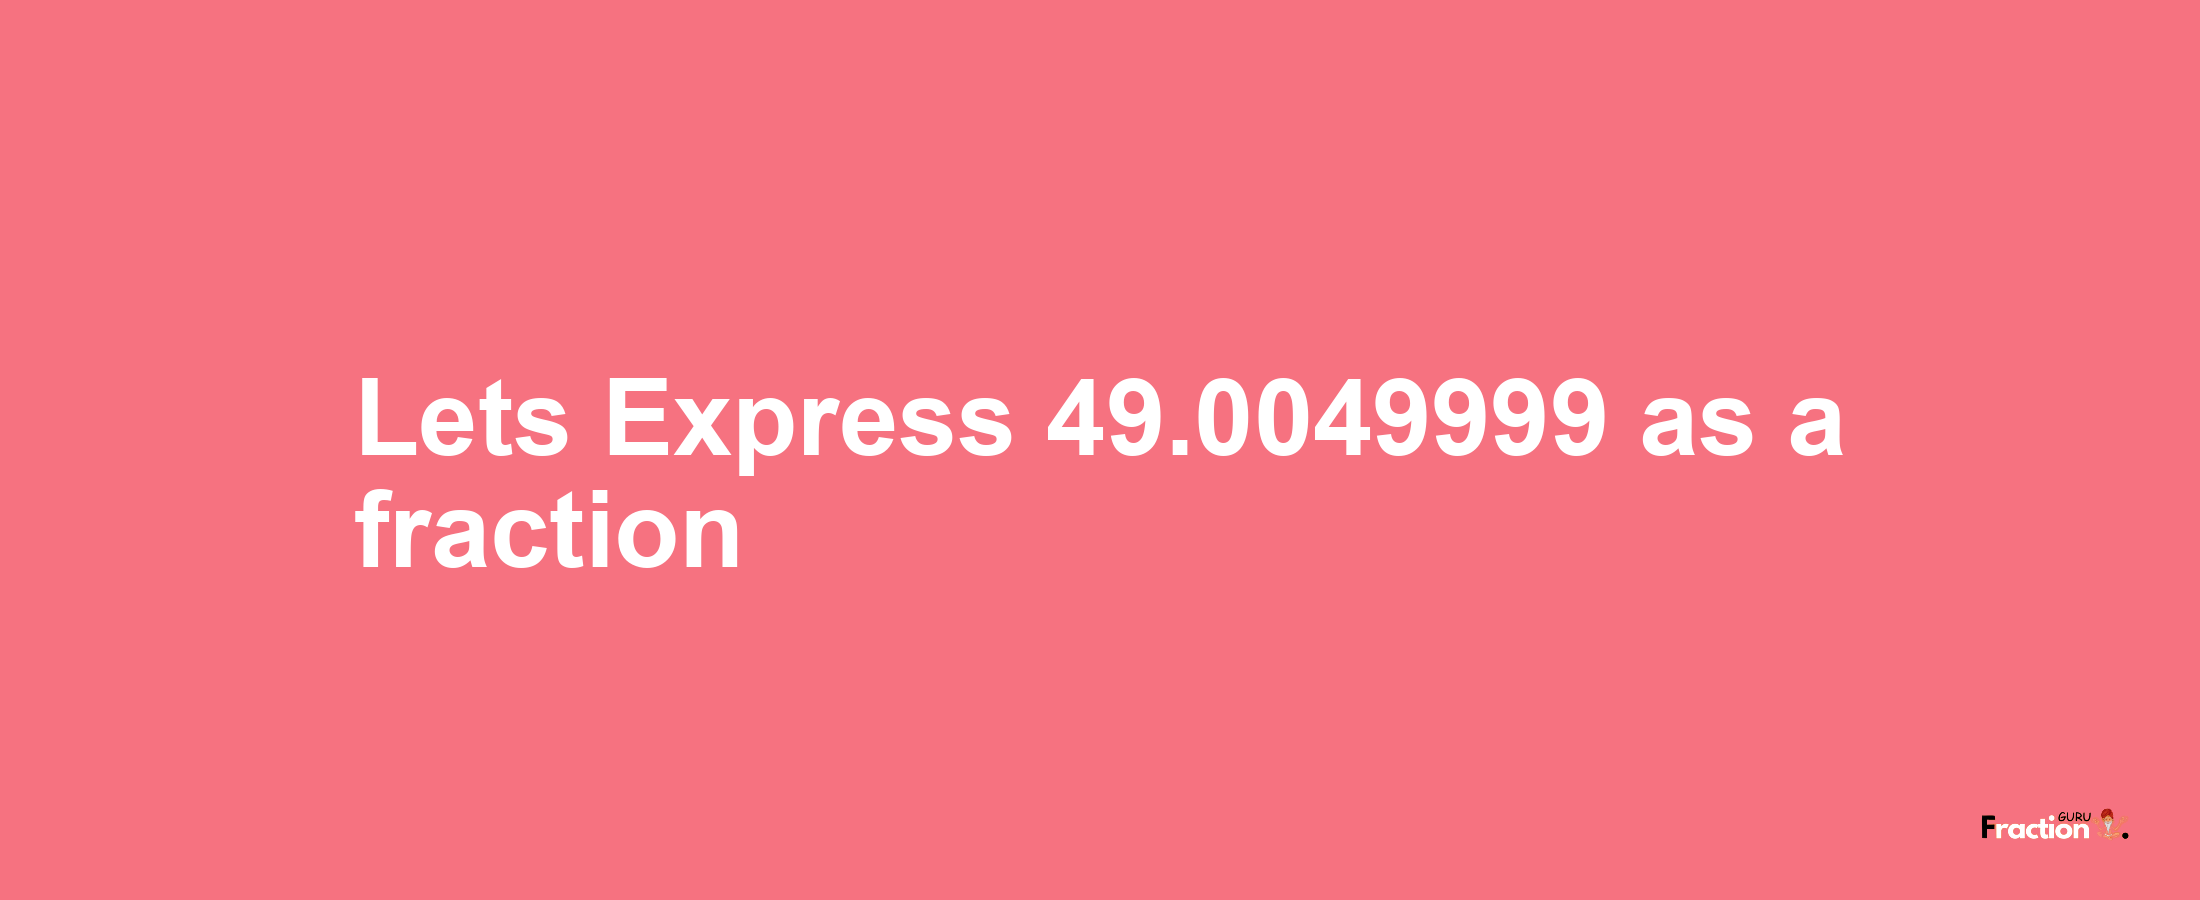 Lets Express 49.0049999 as afraction